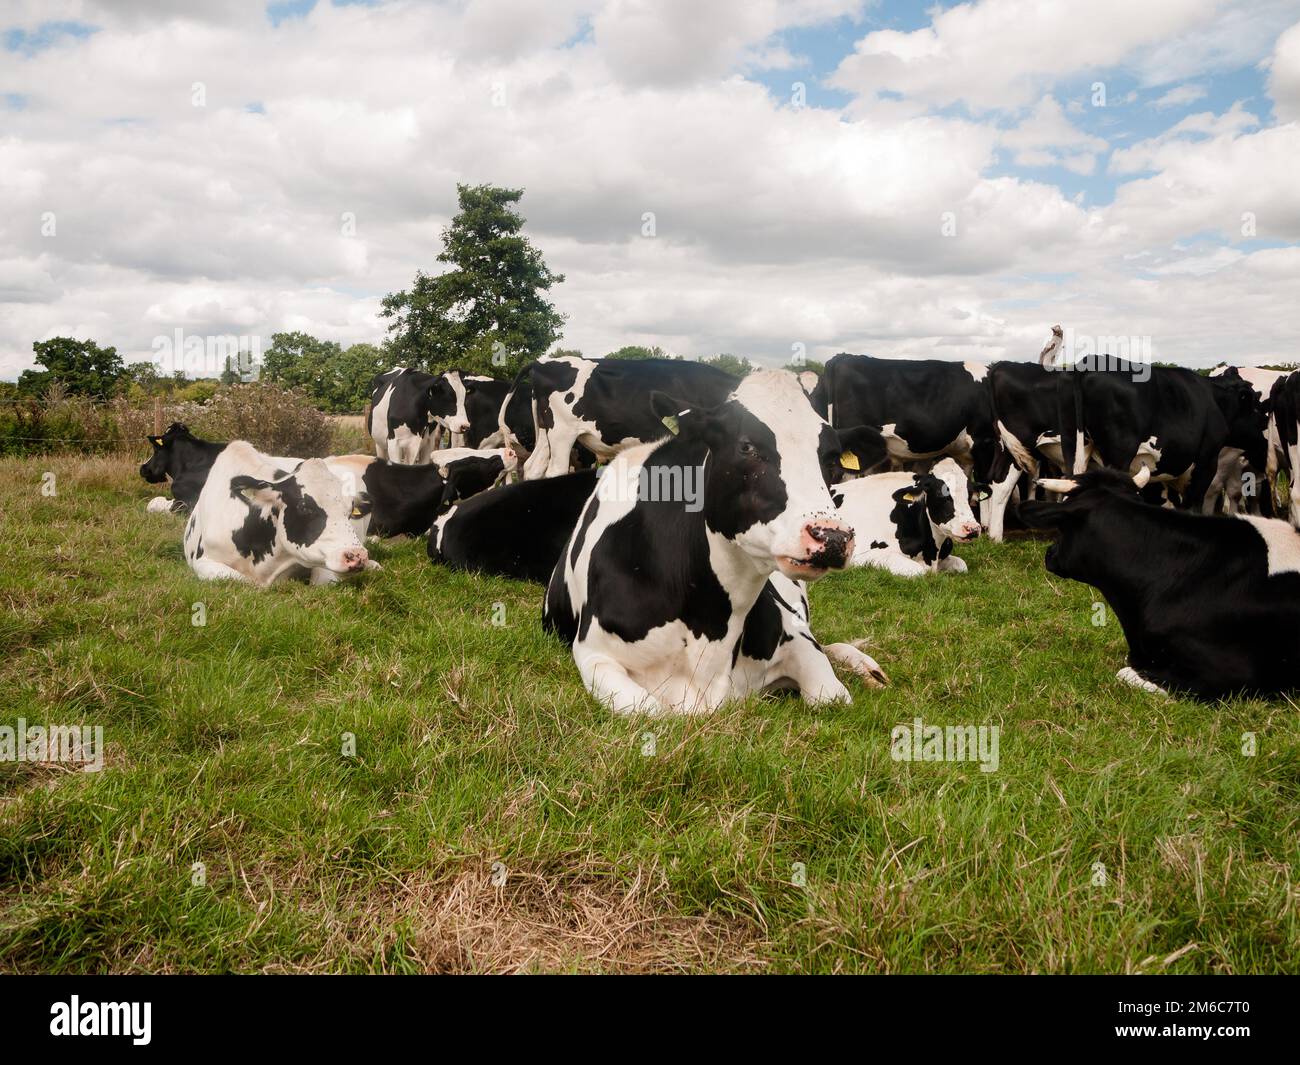 Group of bovine steer face up close black and white cow Stock Photo